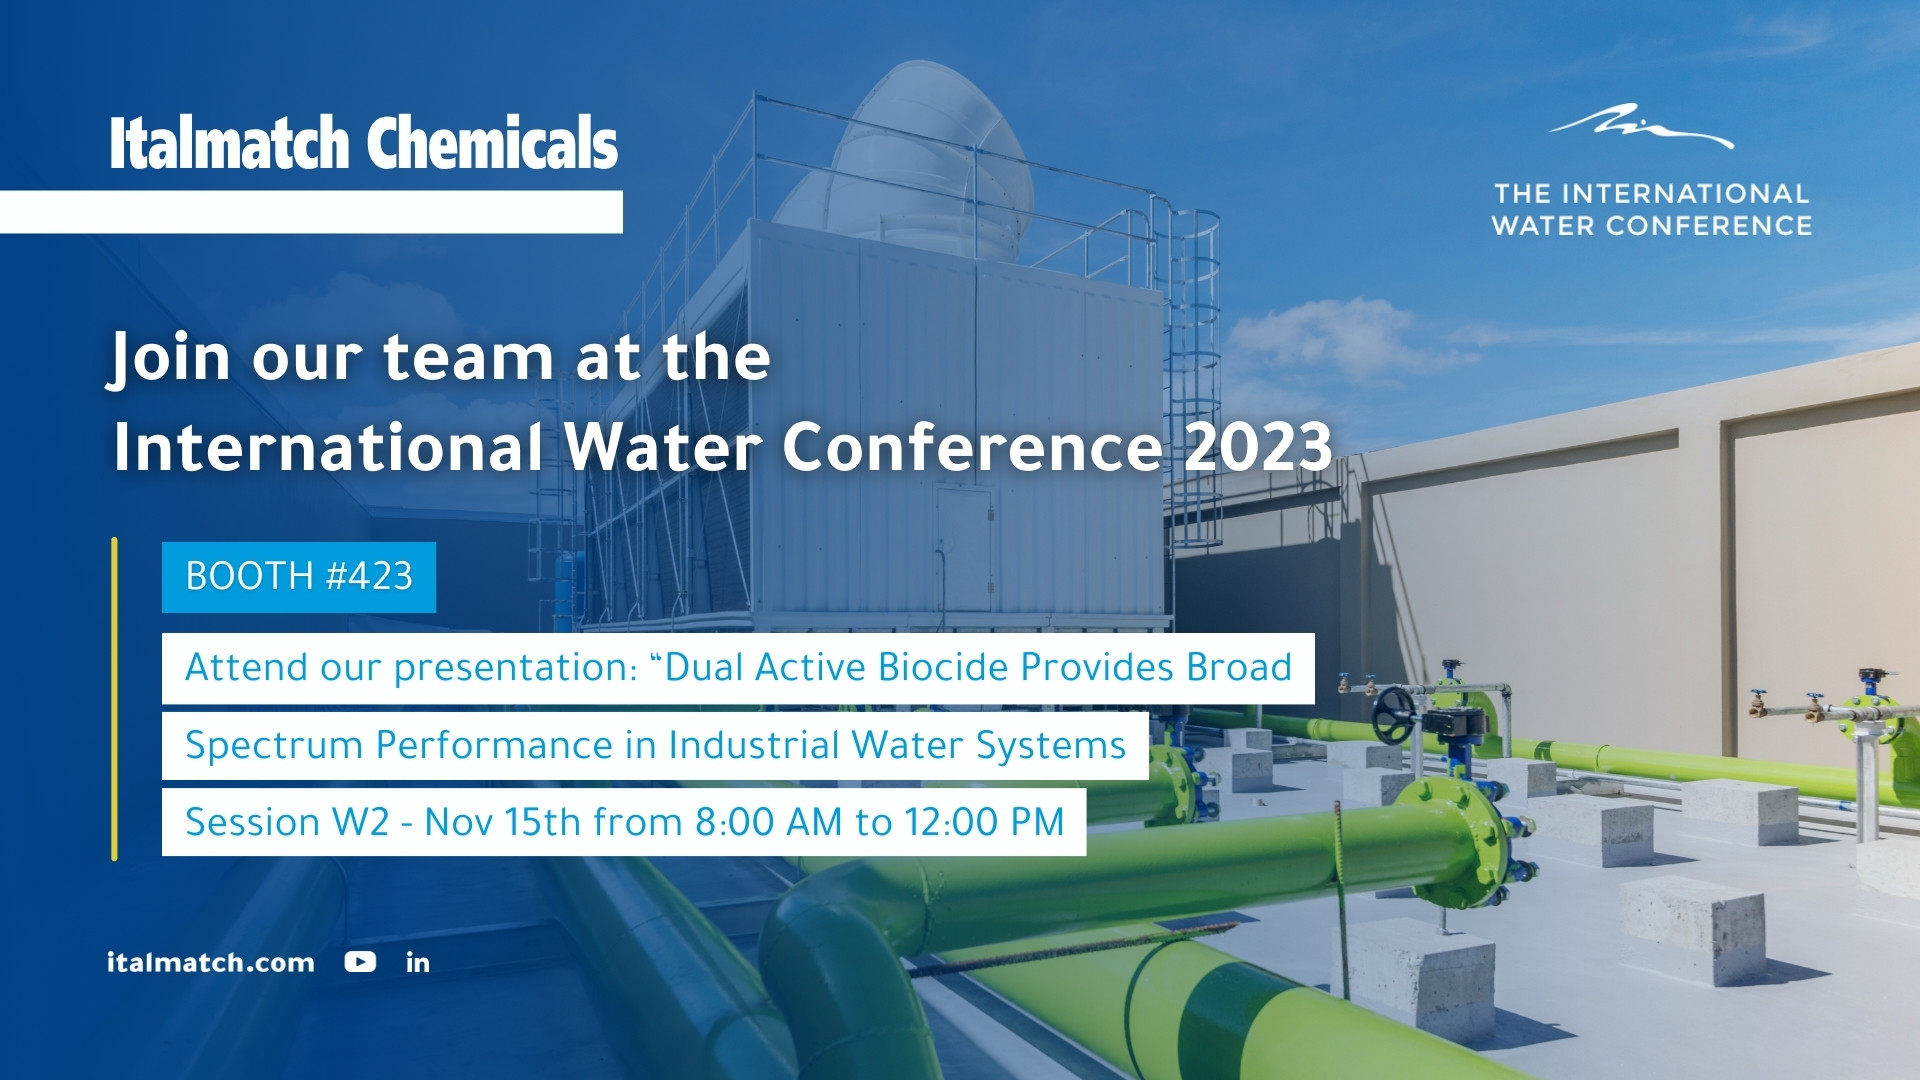 Italmatch Chemicals at the International Water Conference 2023